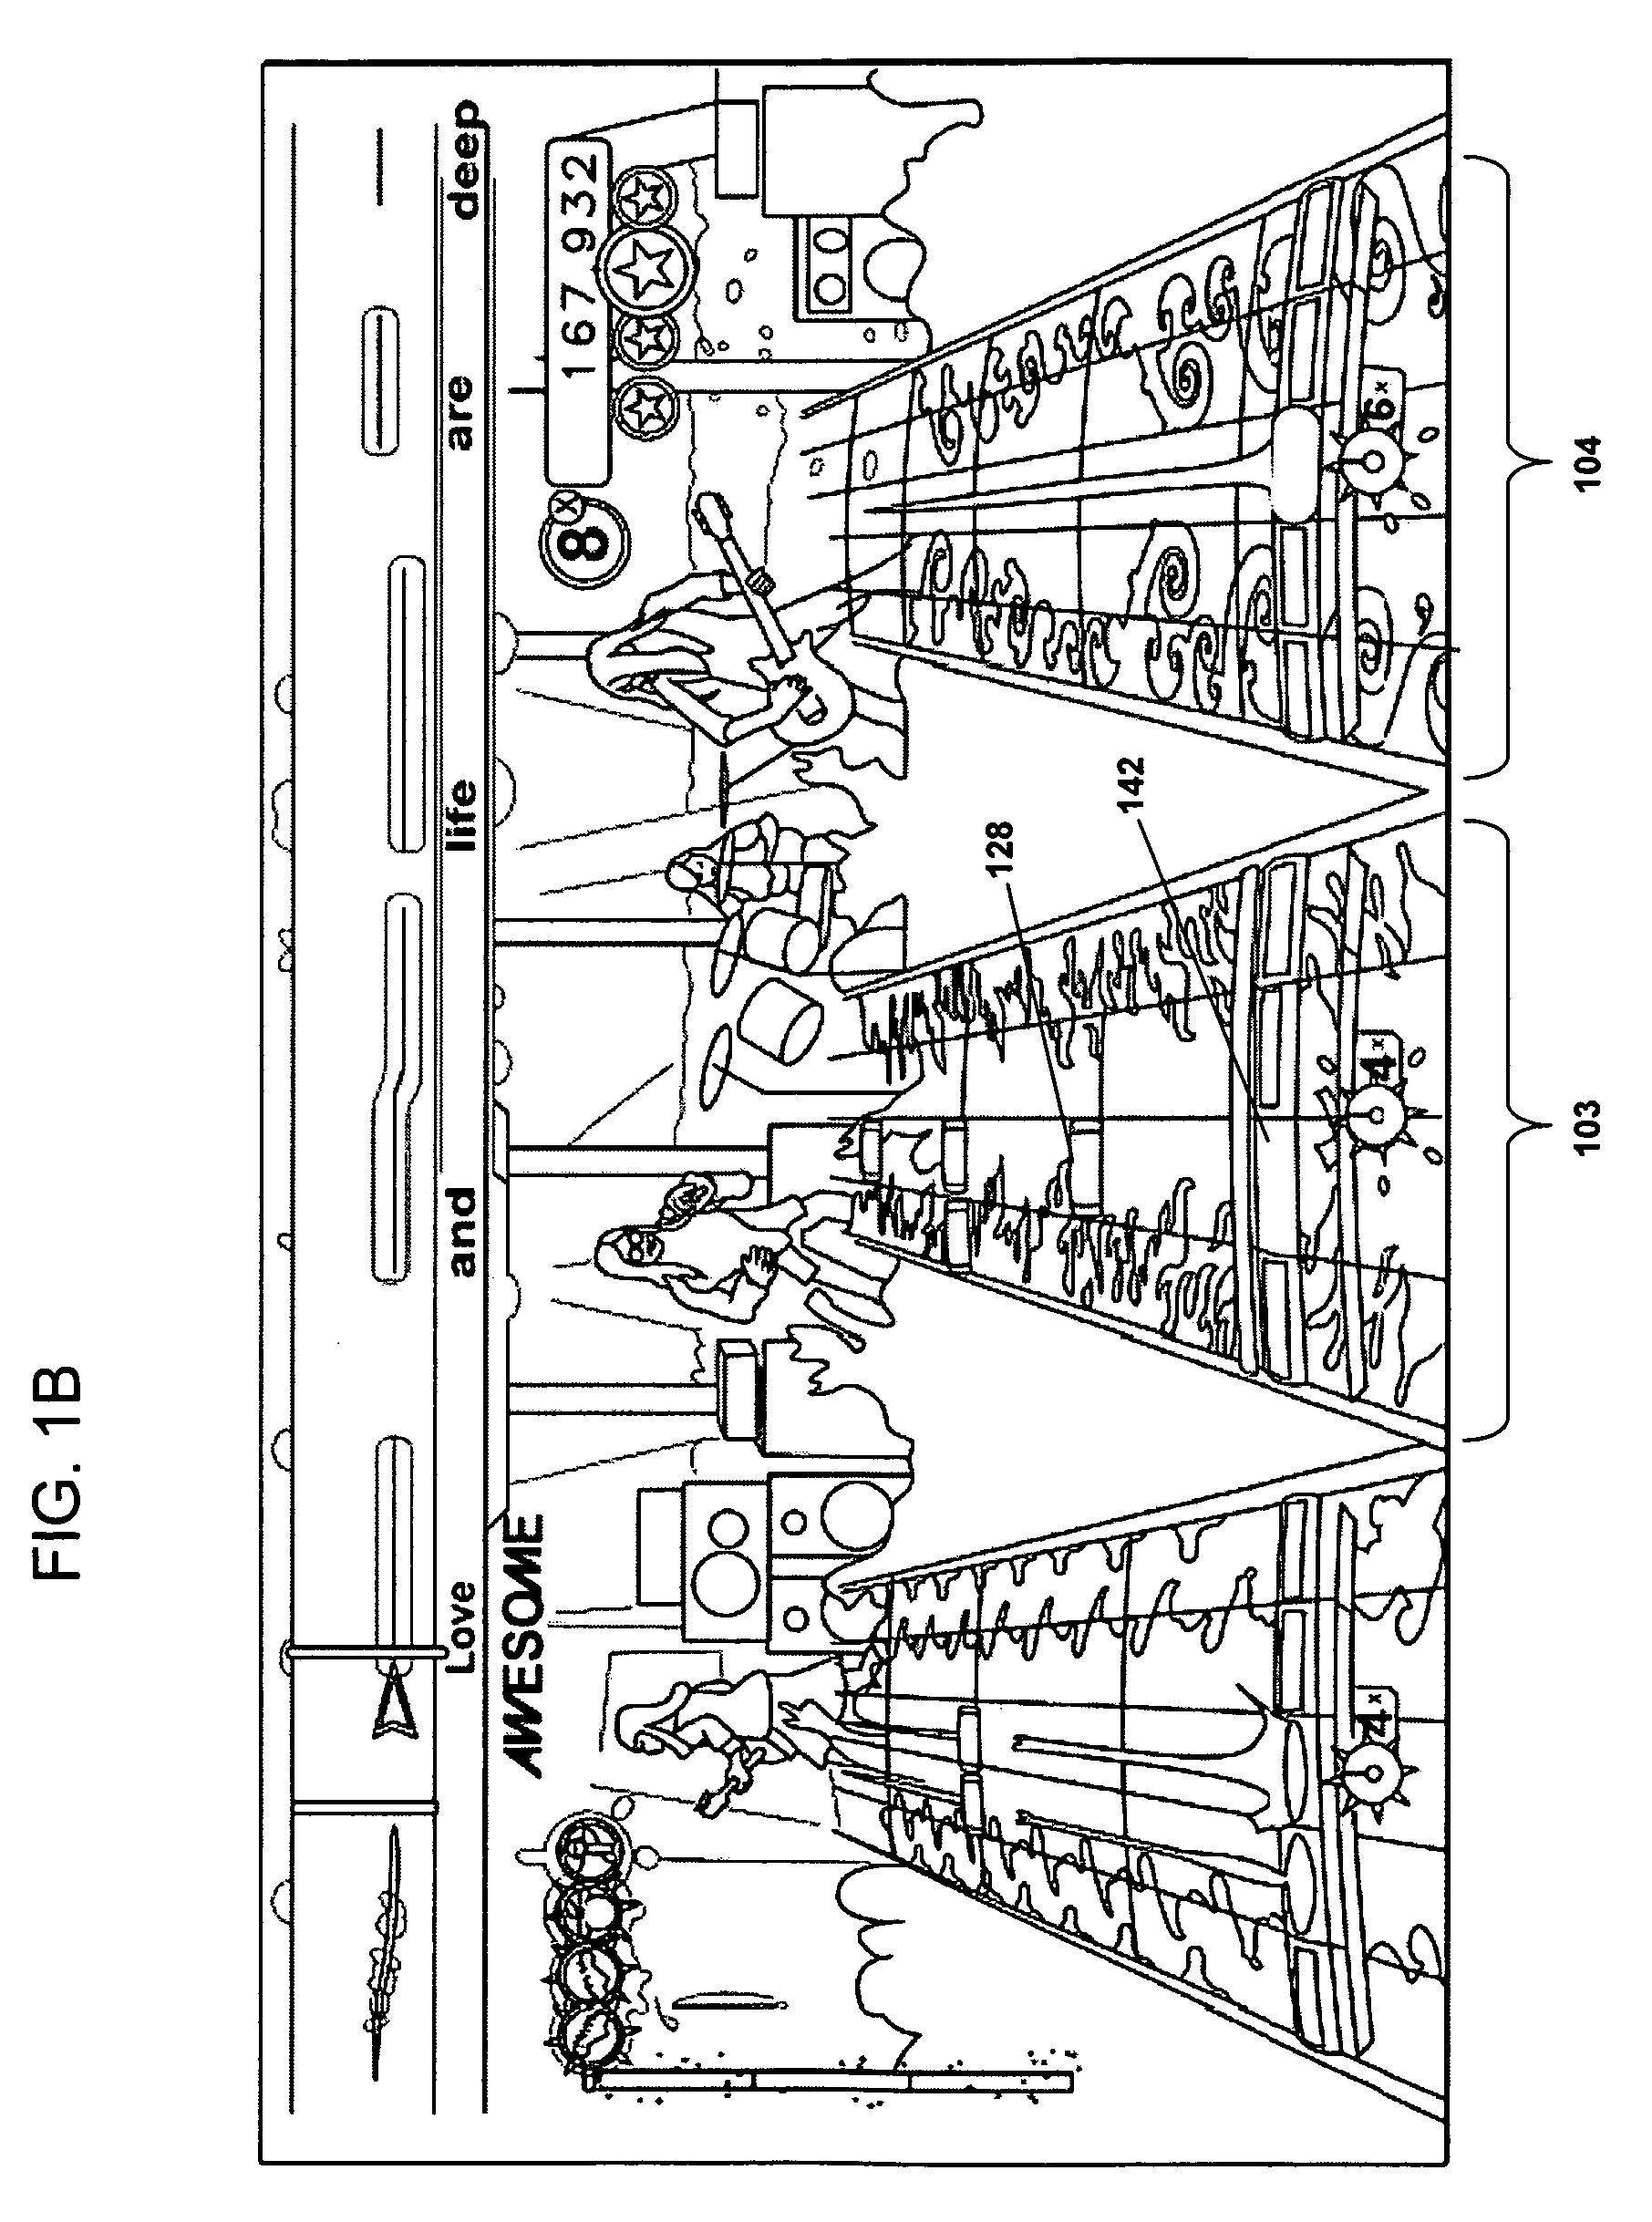 Systems and methods for providing a vocal experience for a player of a rhythm action game